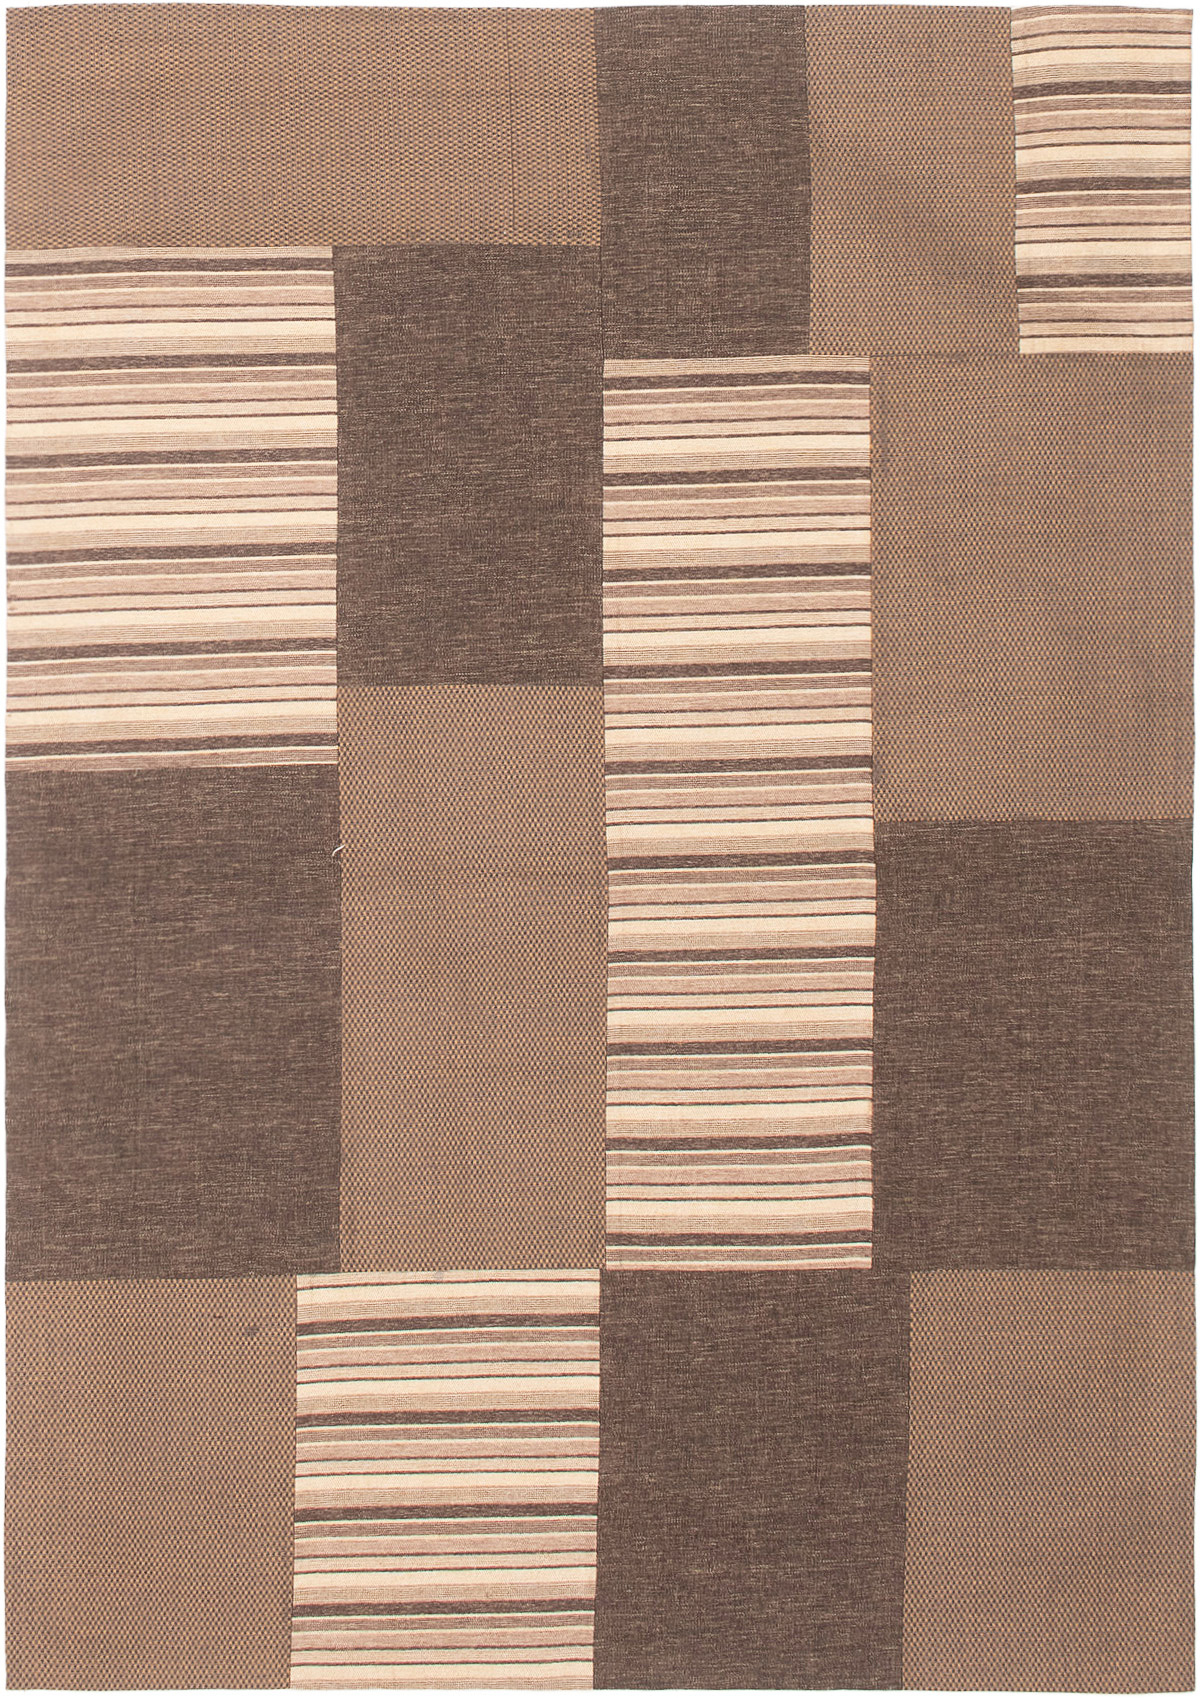 Handmade Collage Brown, Ivory Chenille Rug 4'7" x 6'7" Size: 4'7" x 6'7"  